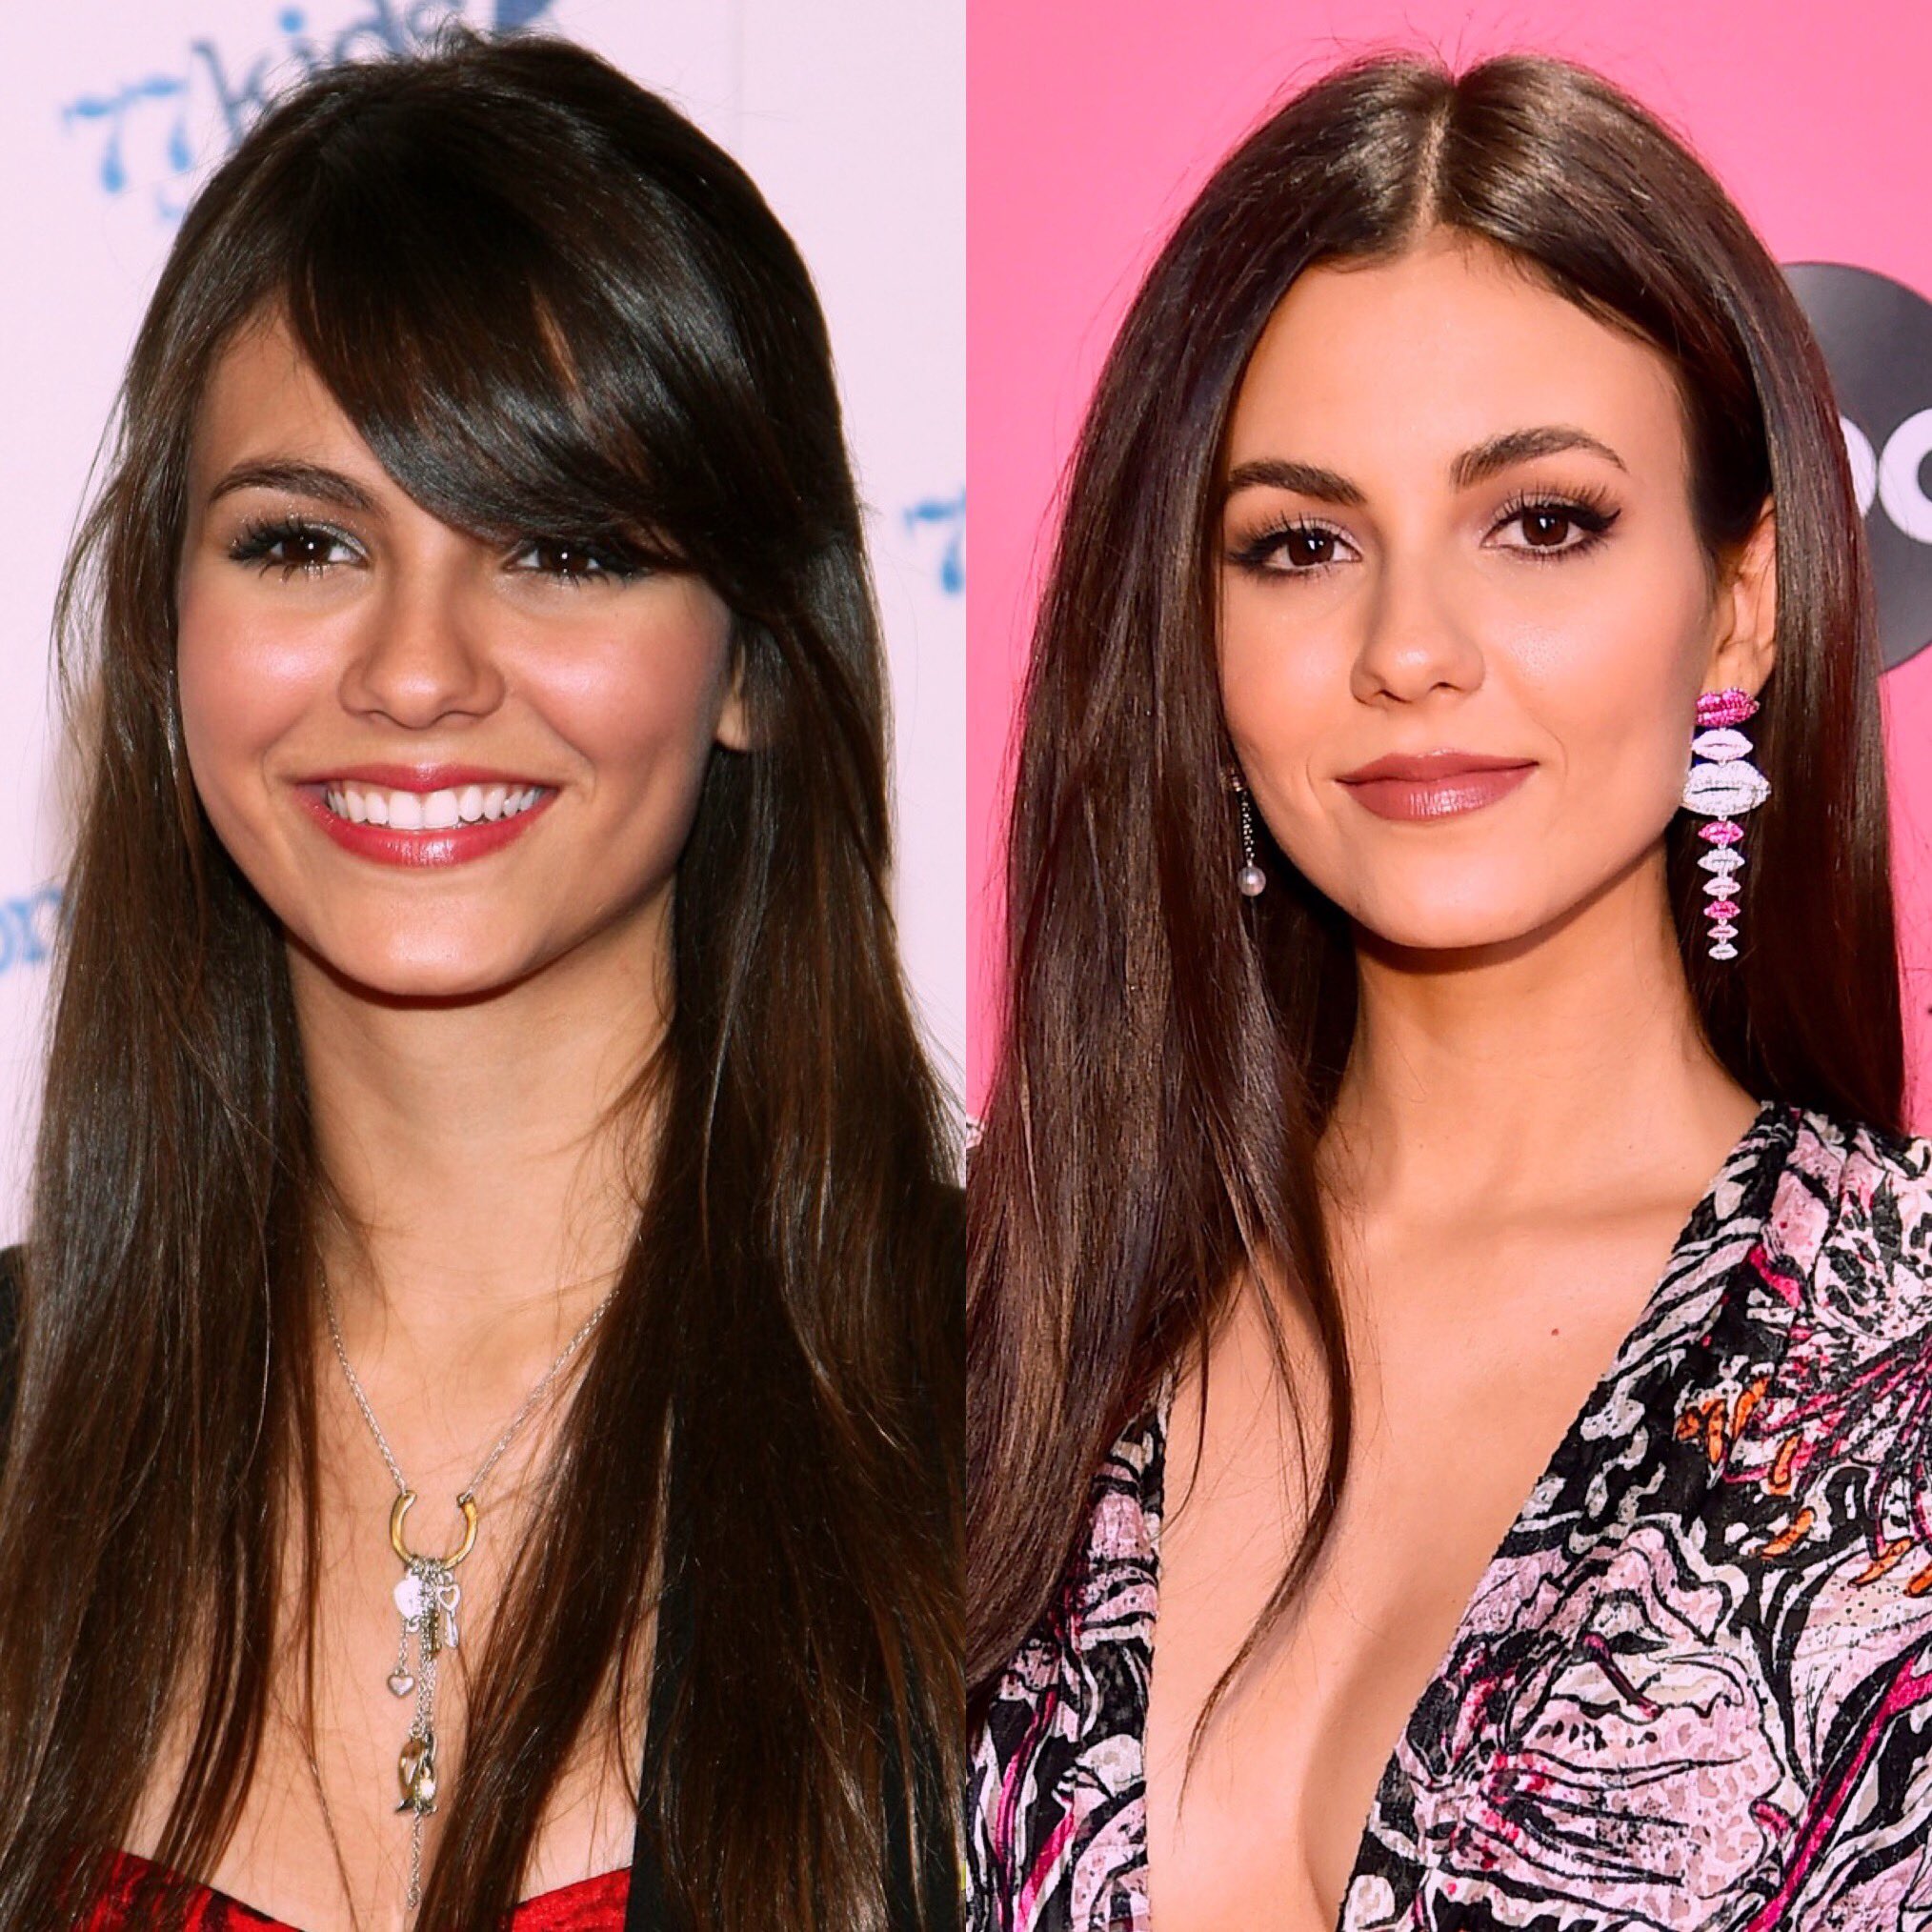 Victoria Justice on Twitter.